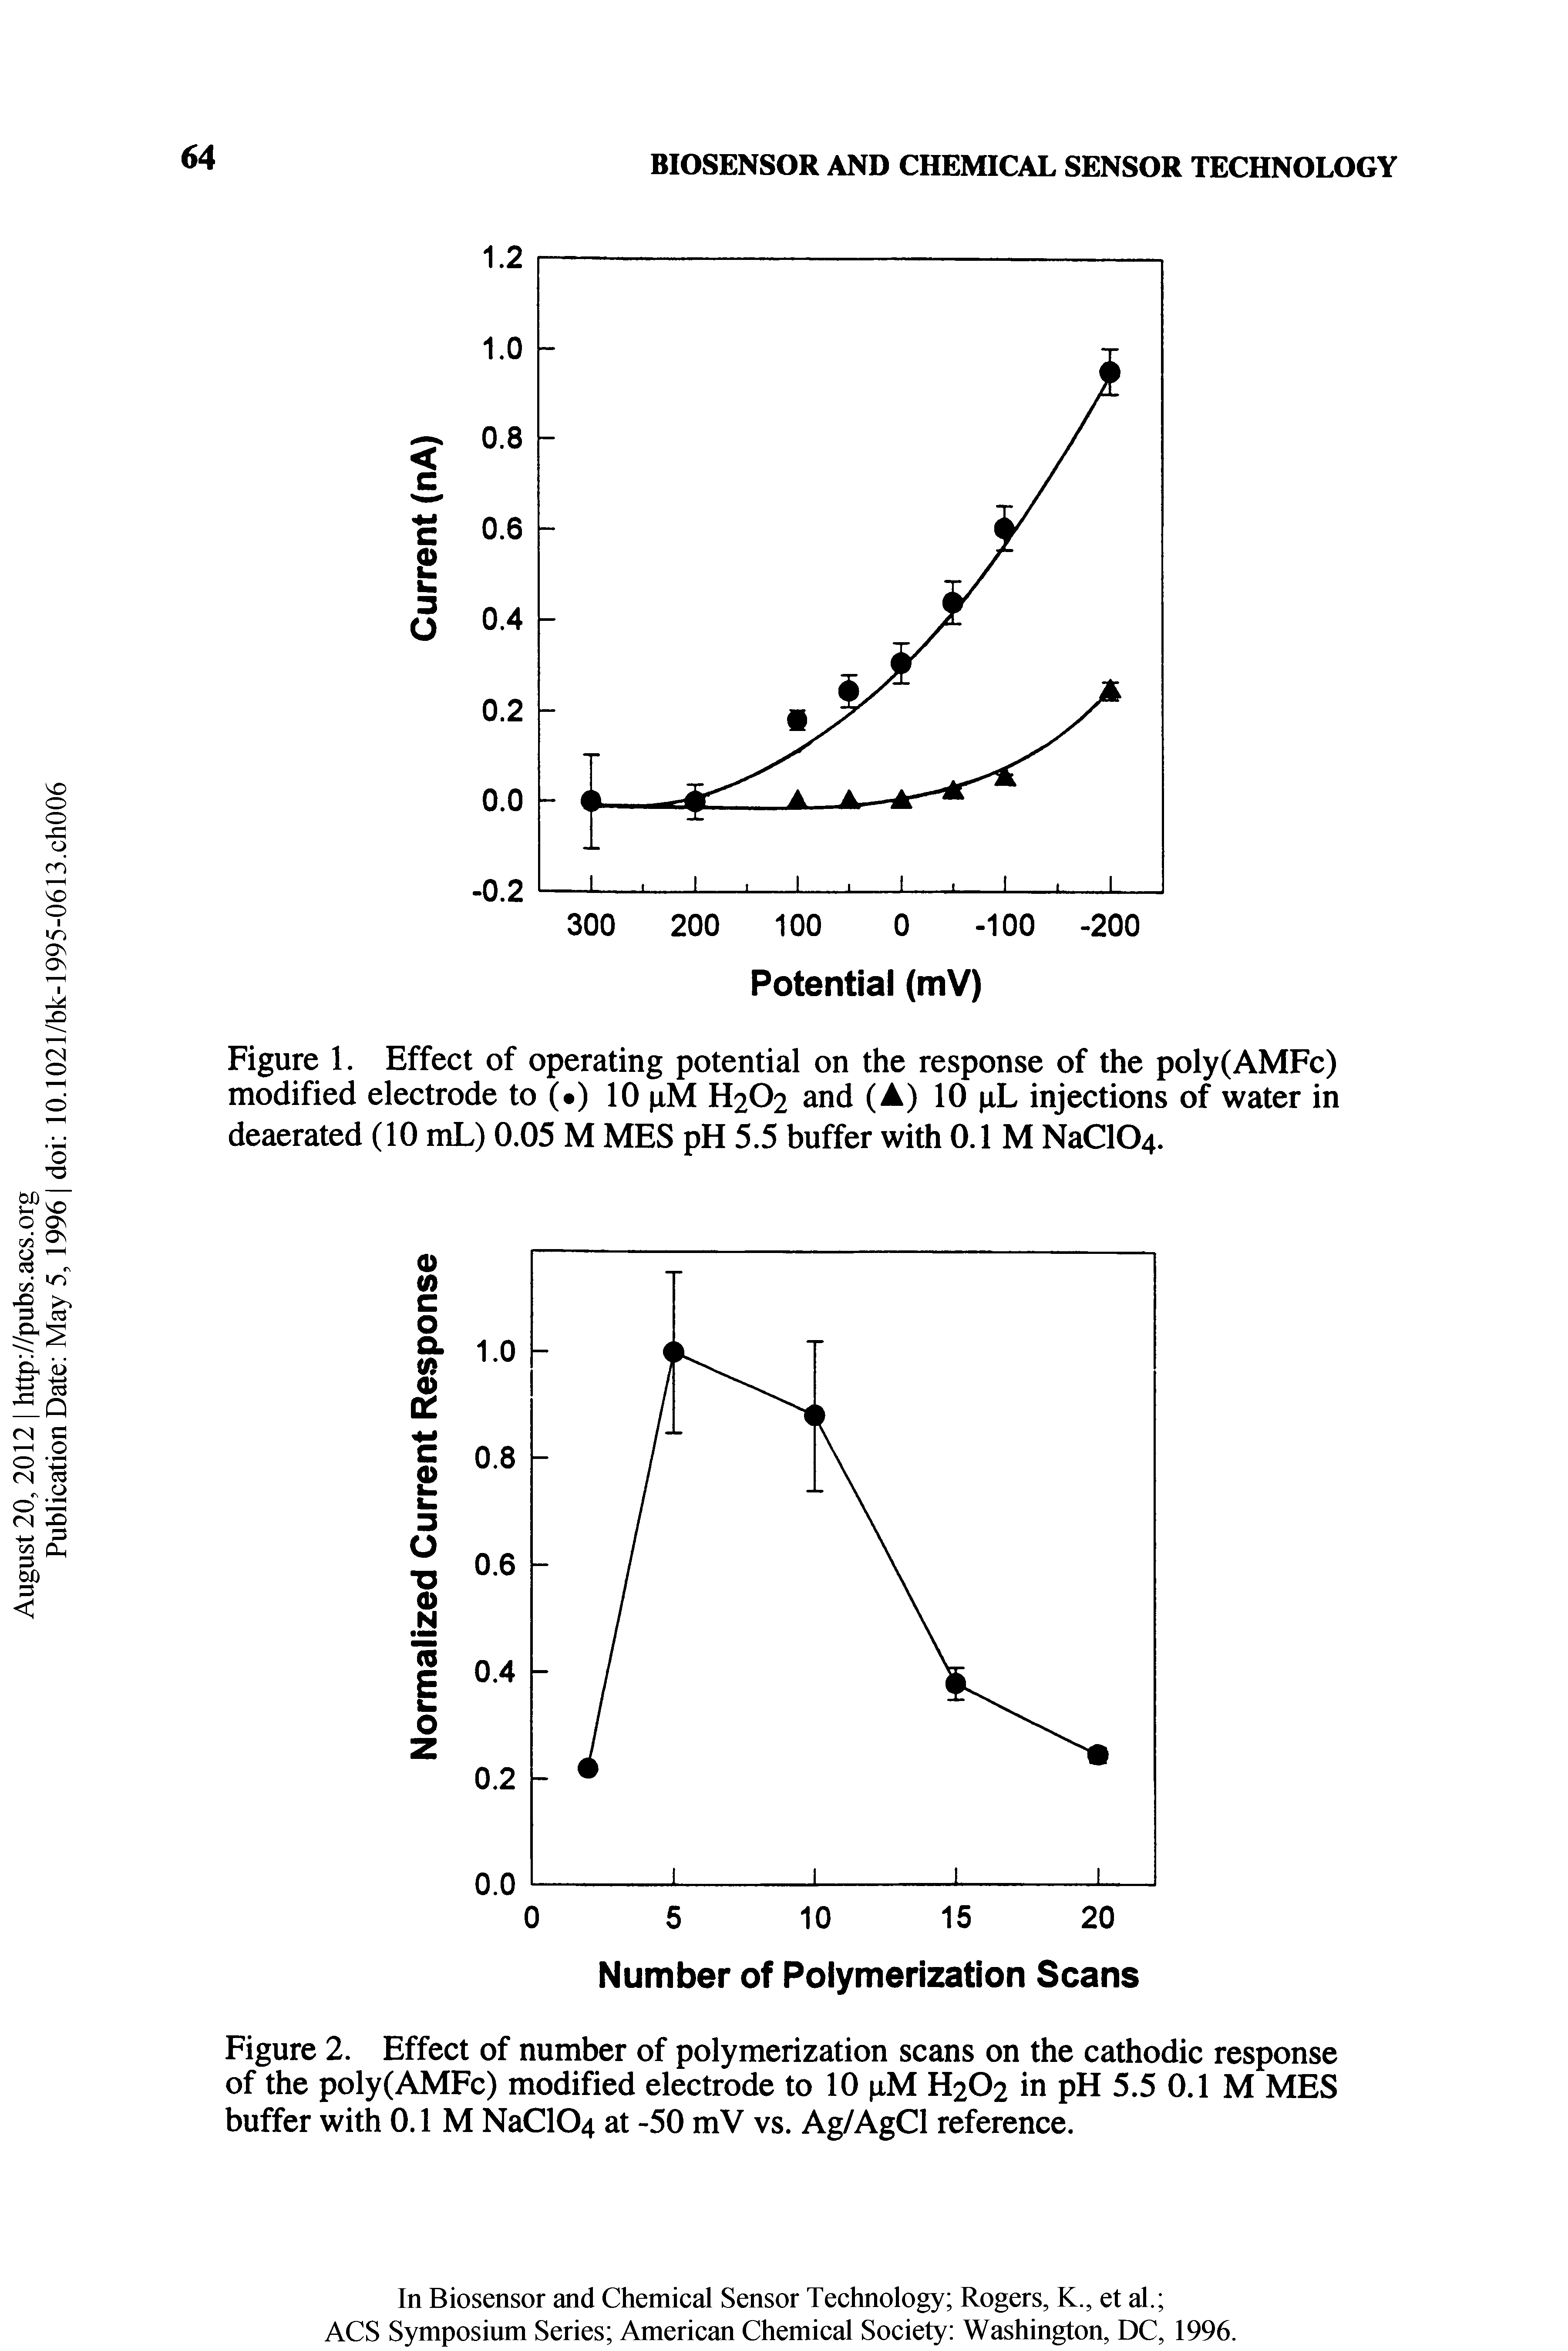 Figure 1. Effect of operating potential on the response of the poly(AMFc) modified electrode to ( ) 10 pM H2O2 and (A) 10 pL injections of water in deaerated (10 mL) 0.05 M MES pH 5.5 buffer with 0.1 M NaC104.